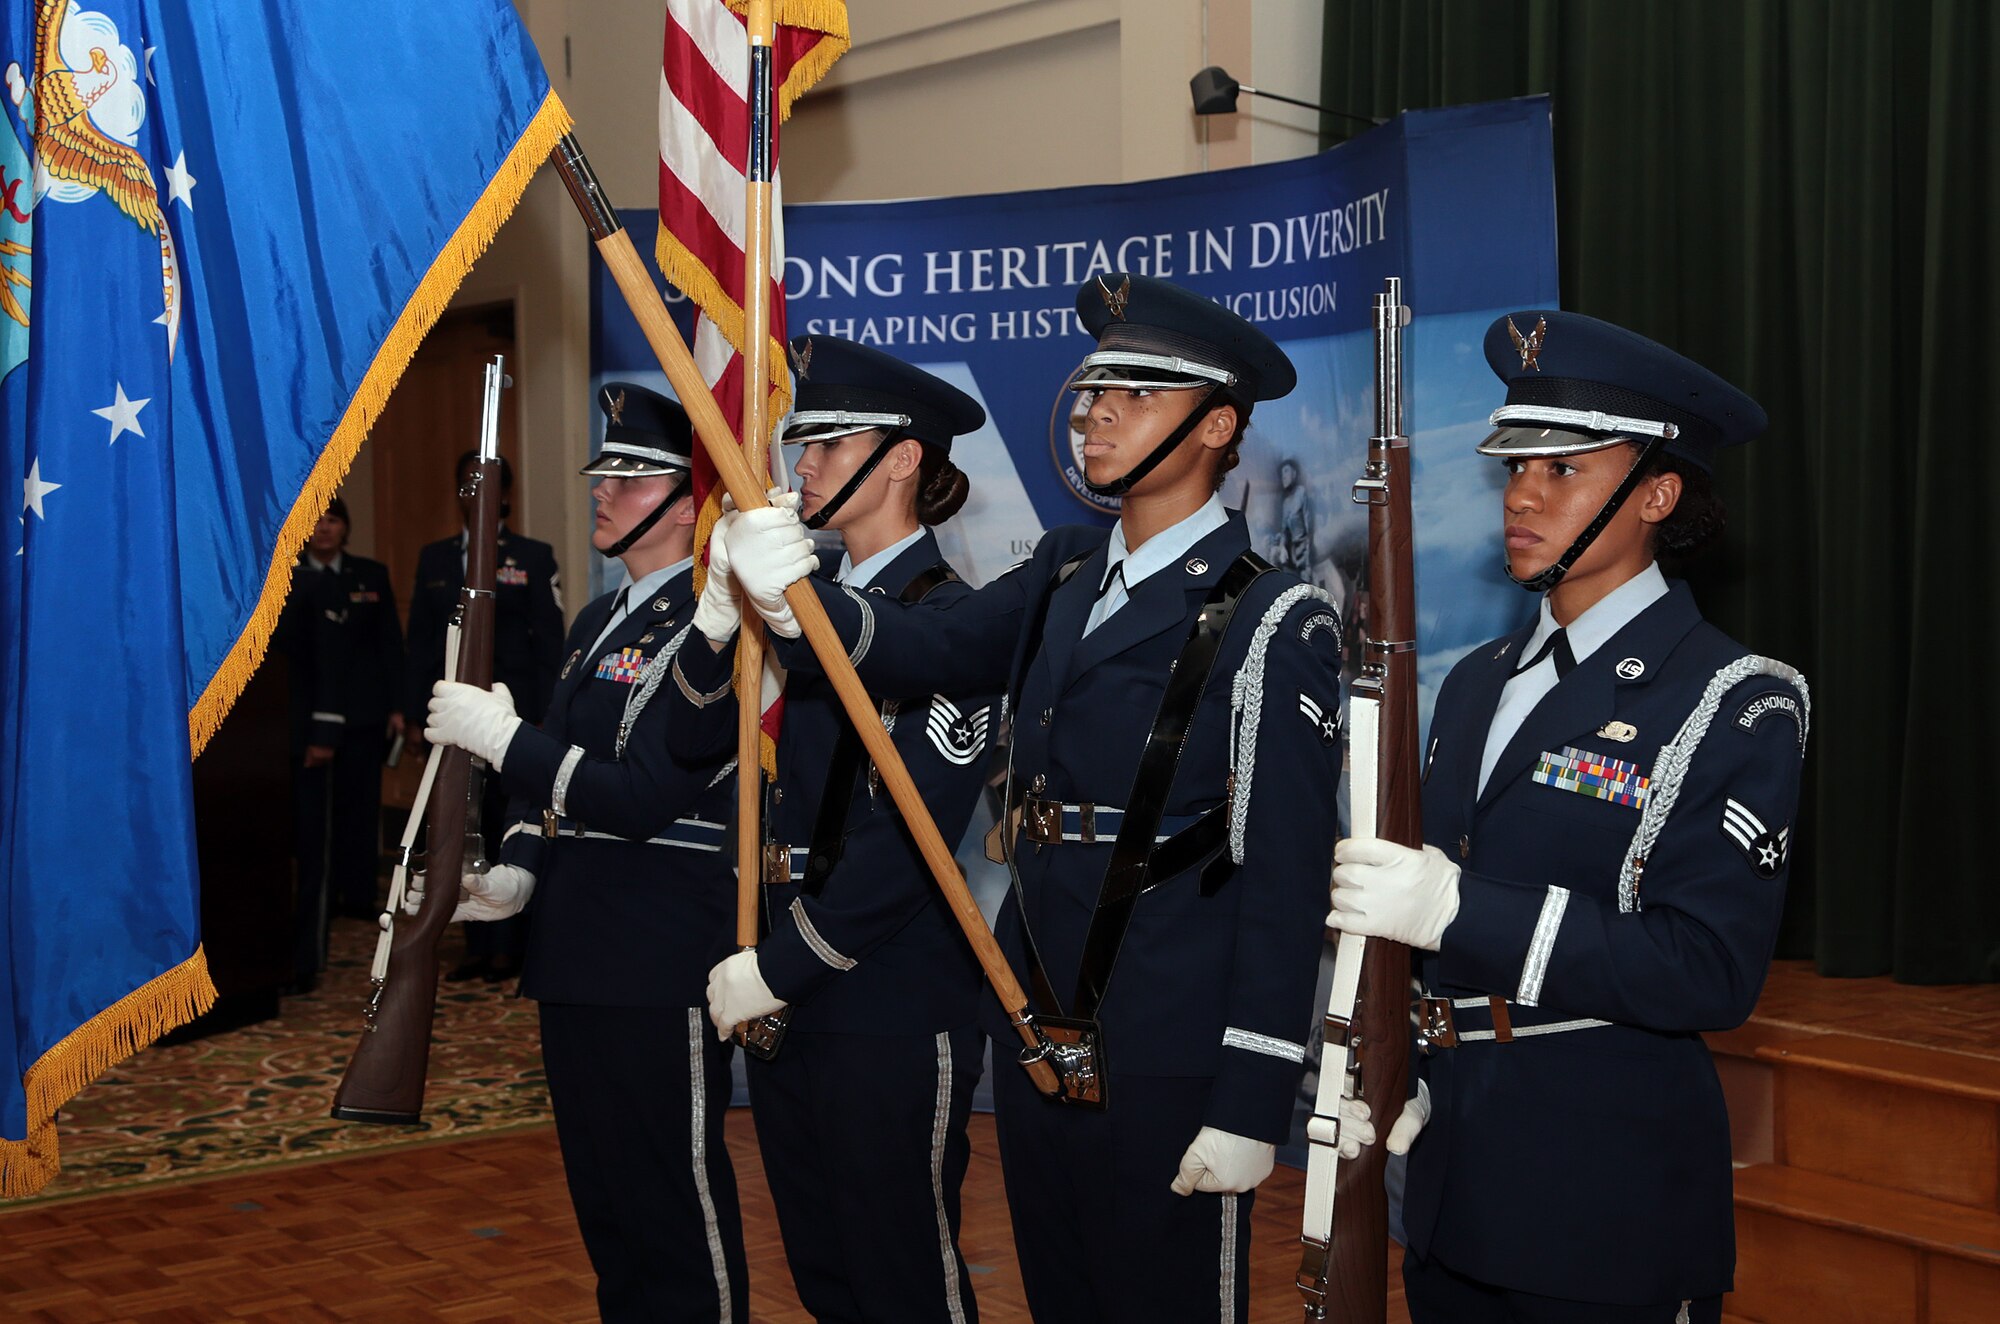 An all-female Honor Guard detail from the 802nd Force Support Squadron posts the colors during the Joint Base San Antonio-Lackland Women in the Air Force reunion  luncheon Oct. 7, 2016, at  the JBSA-Lackland Gateway Club. JBSA-Lackland hosted a reunion of the WAF members and provided the 62 members a tour of the base. WAF was founded in 1948 out of the Women’s Armed Service Integration Act, which enabled tens of thousands of female service members to find jobs in the Air Force. In 1976 women were accepted into the service on an equal basis with men.